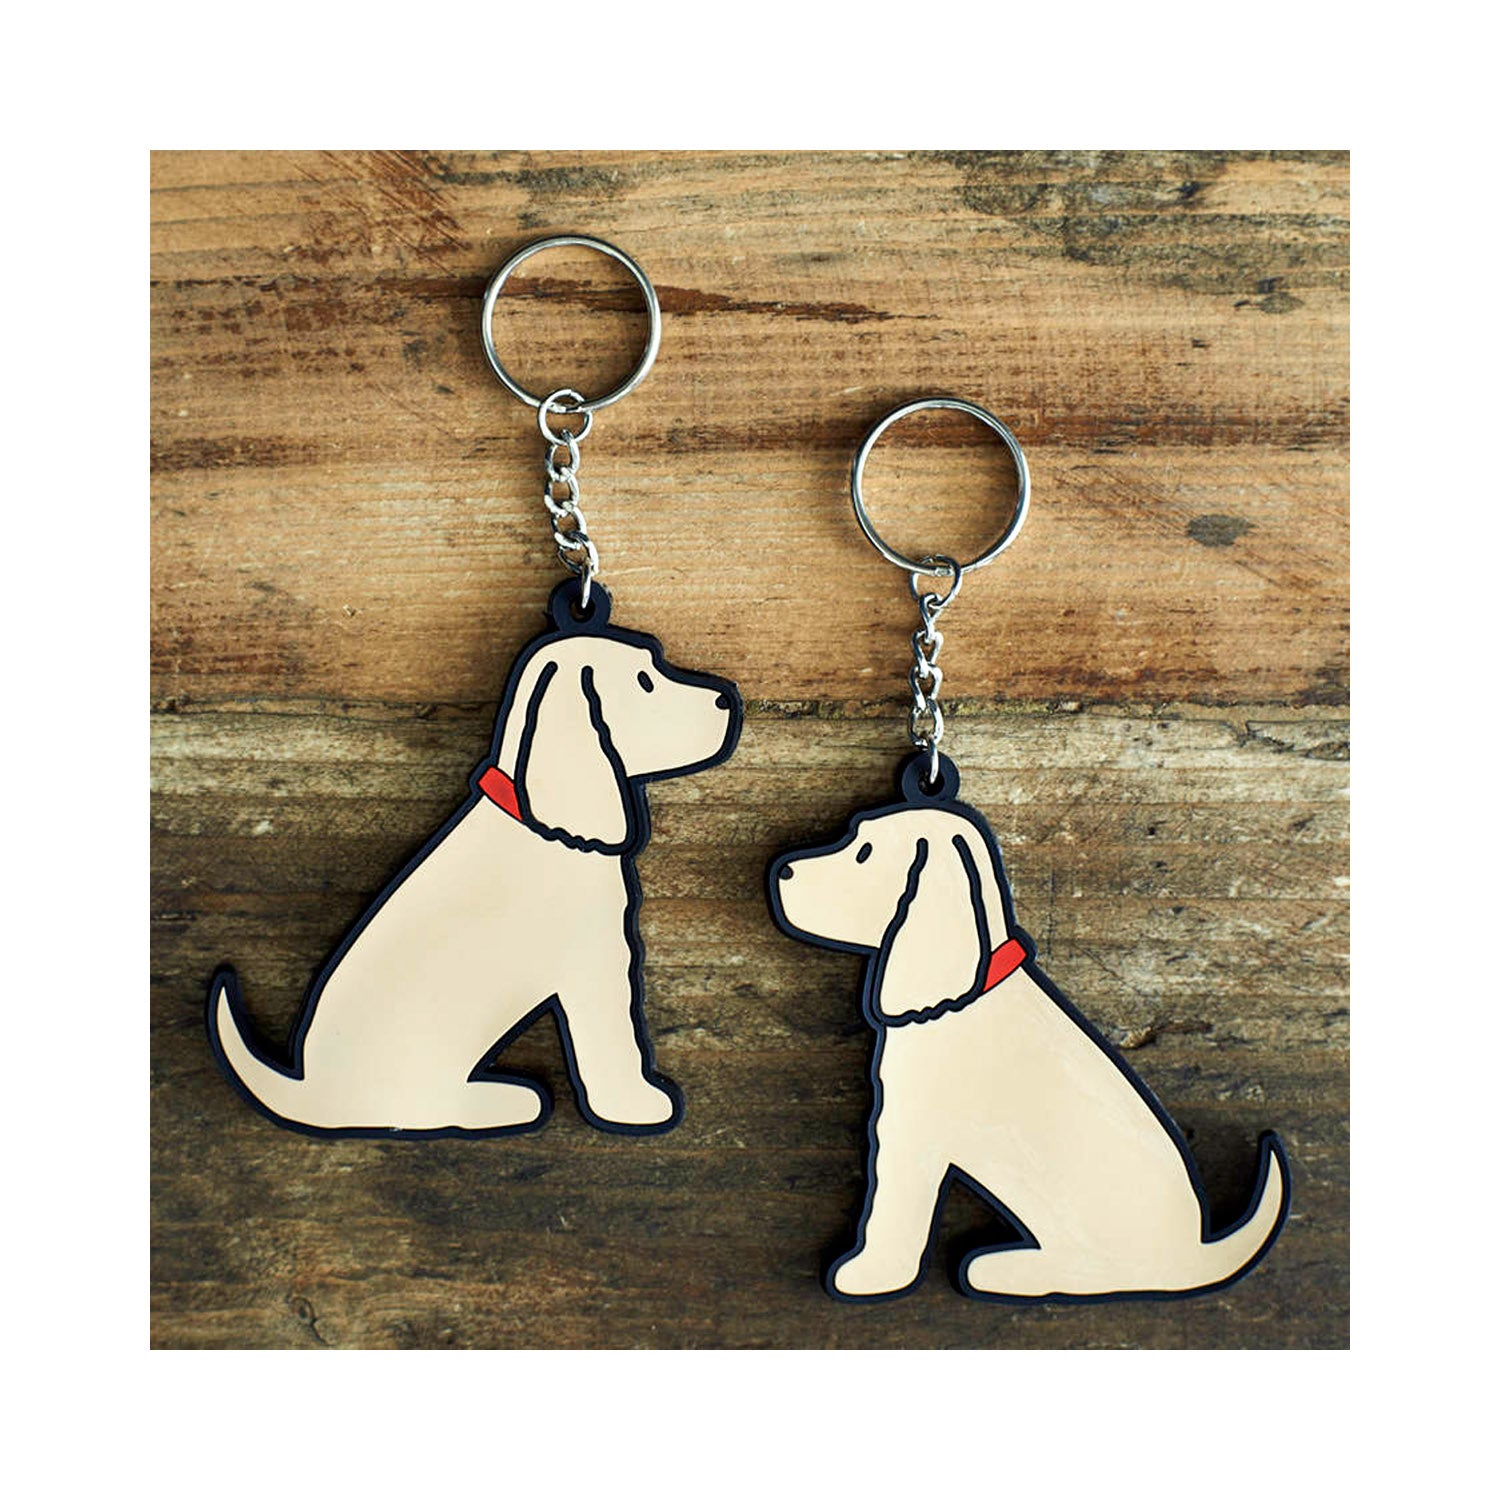 Dog Lover Gifts available at Dog Krazy Gifts - Hetty The Golden Cocker Keyring - part of the Sweet William range available from Dog Krazy Gifts